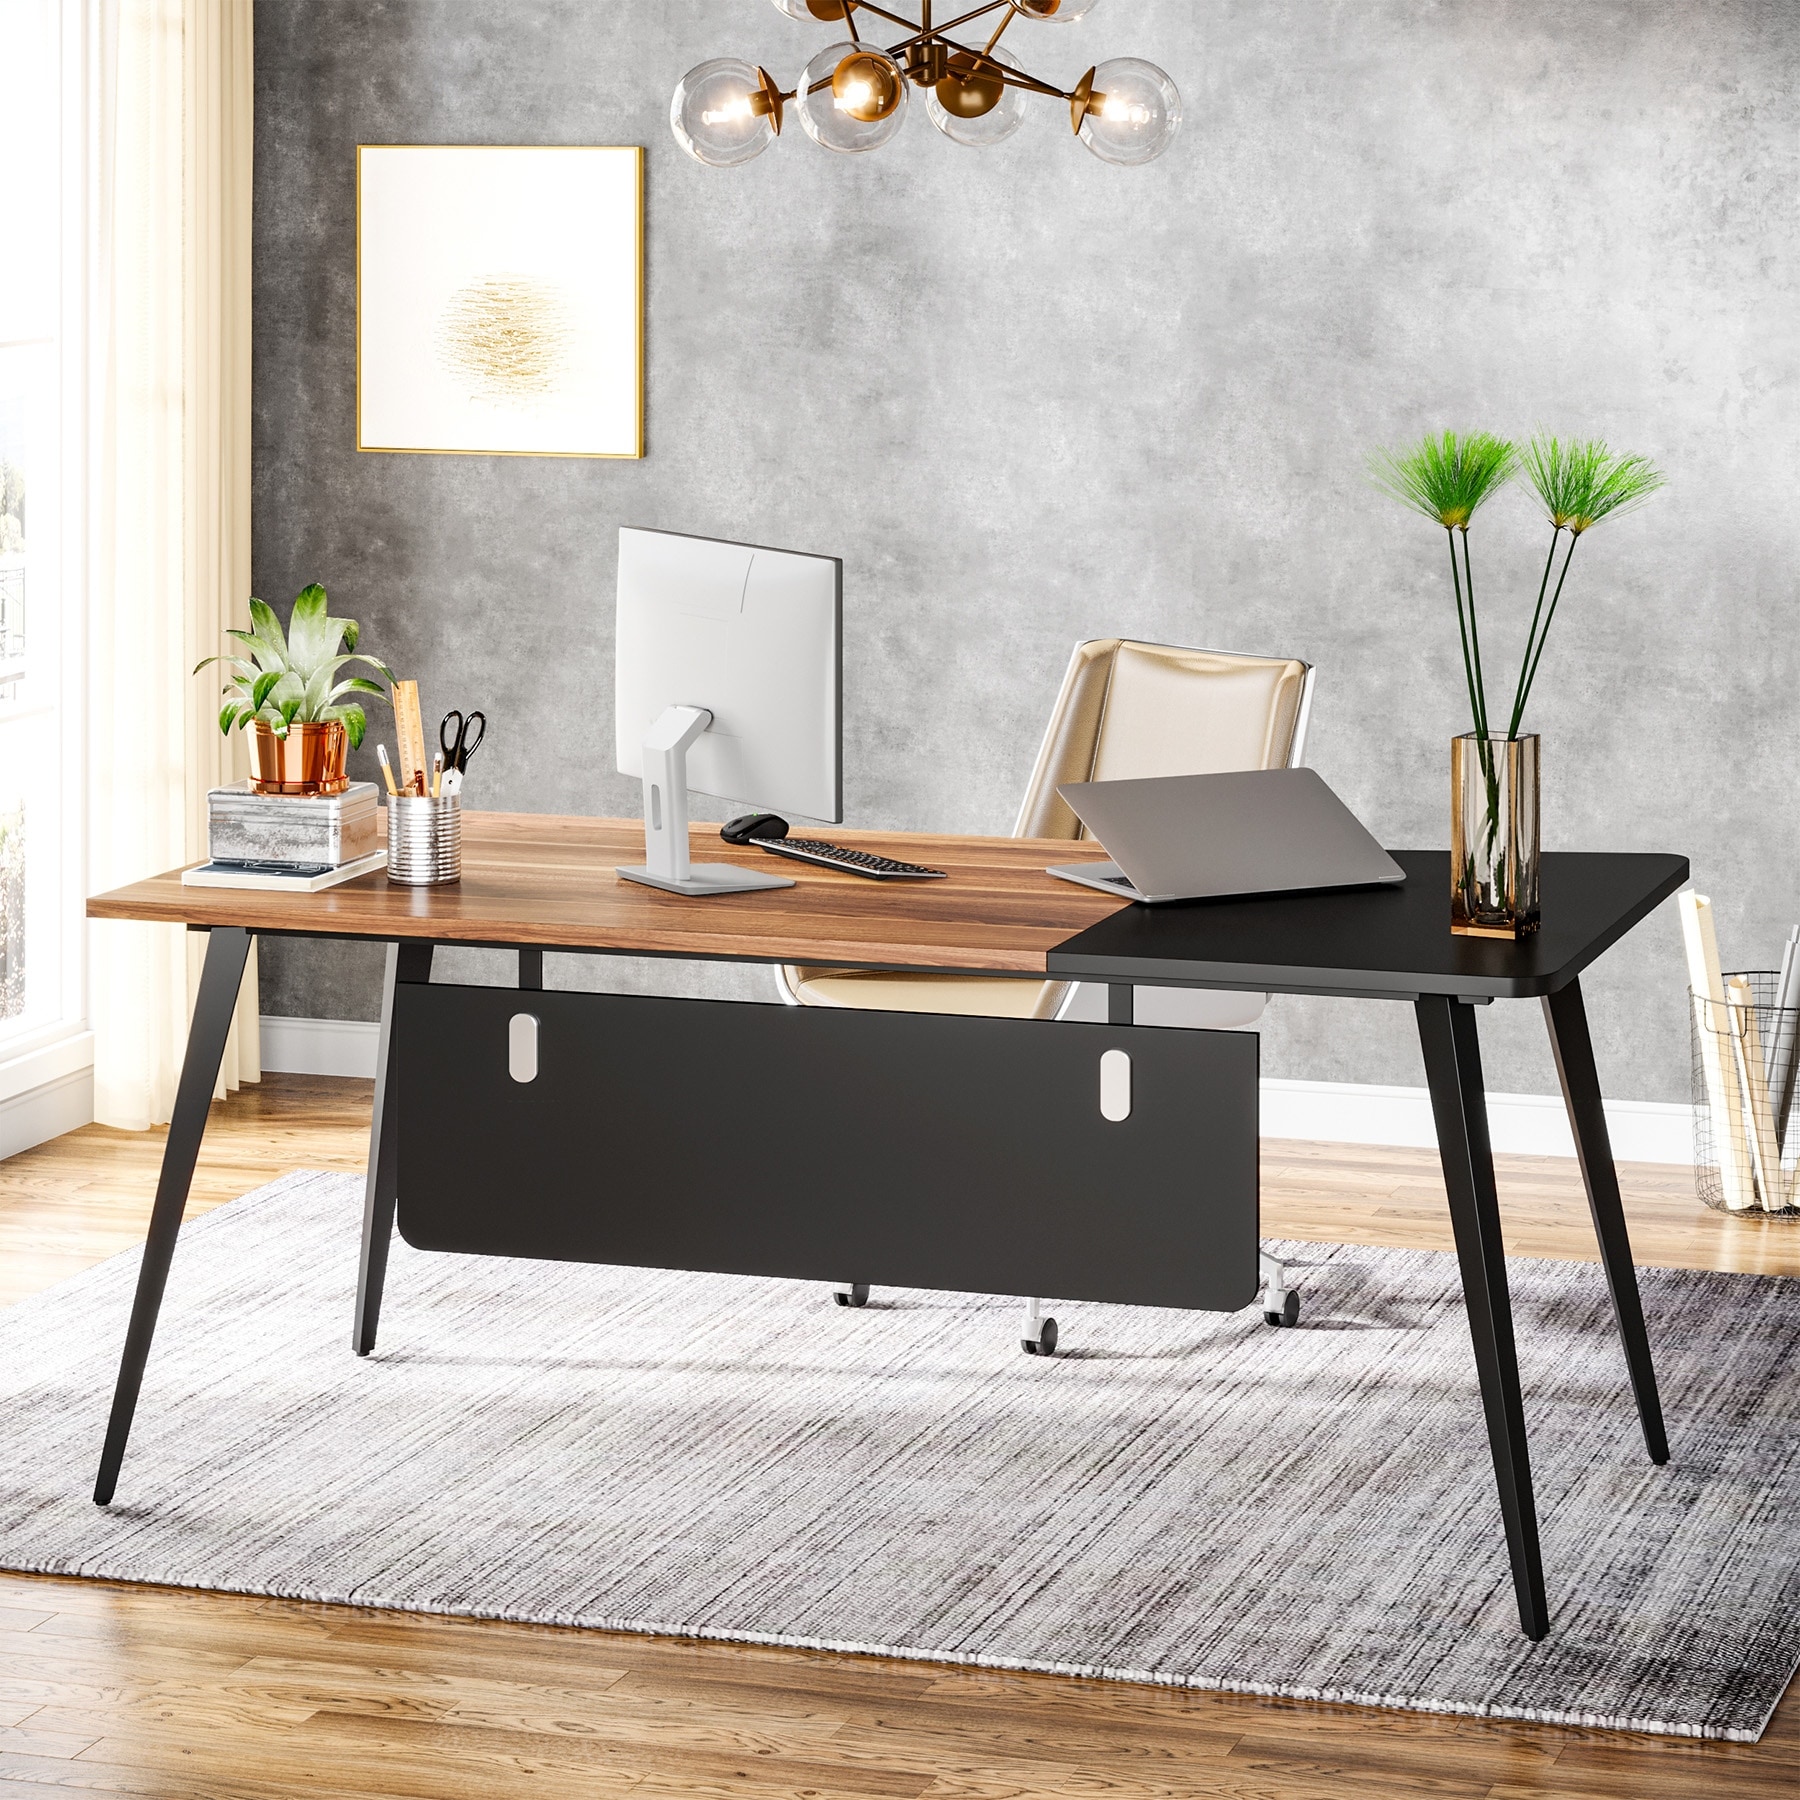 https://ak1.ostkcdn.com/images/products/is/images/direct/cd58586132fa3ed3571a5cd2ad15e6997e06d327/Large-Computer-Desk-70-Inch-Executive-Office-Desk-Modern-Simple-Home-Office-Desk.jpg